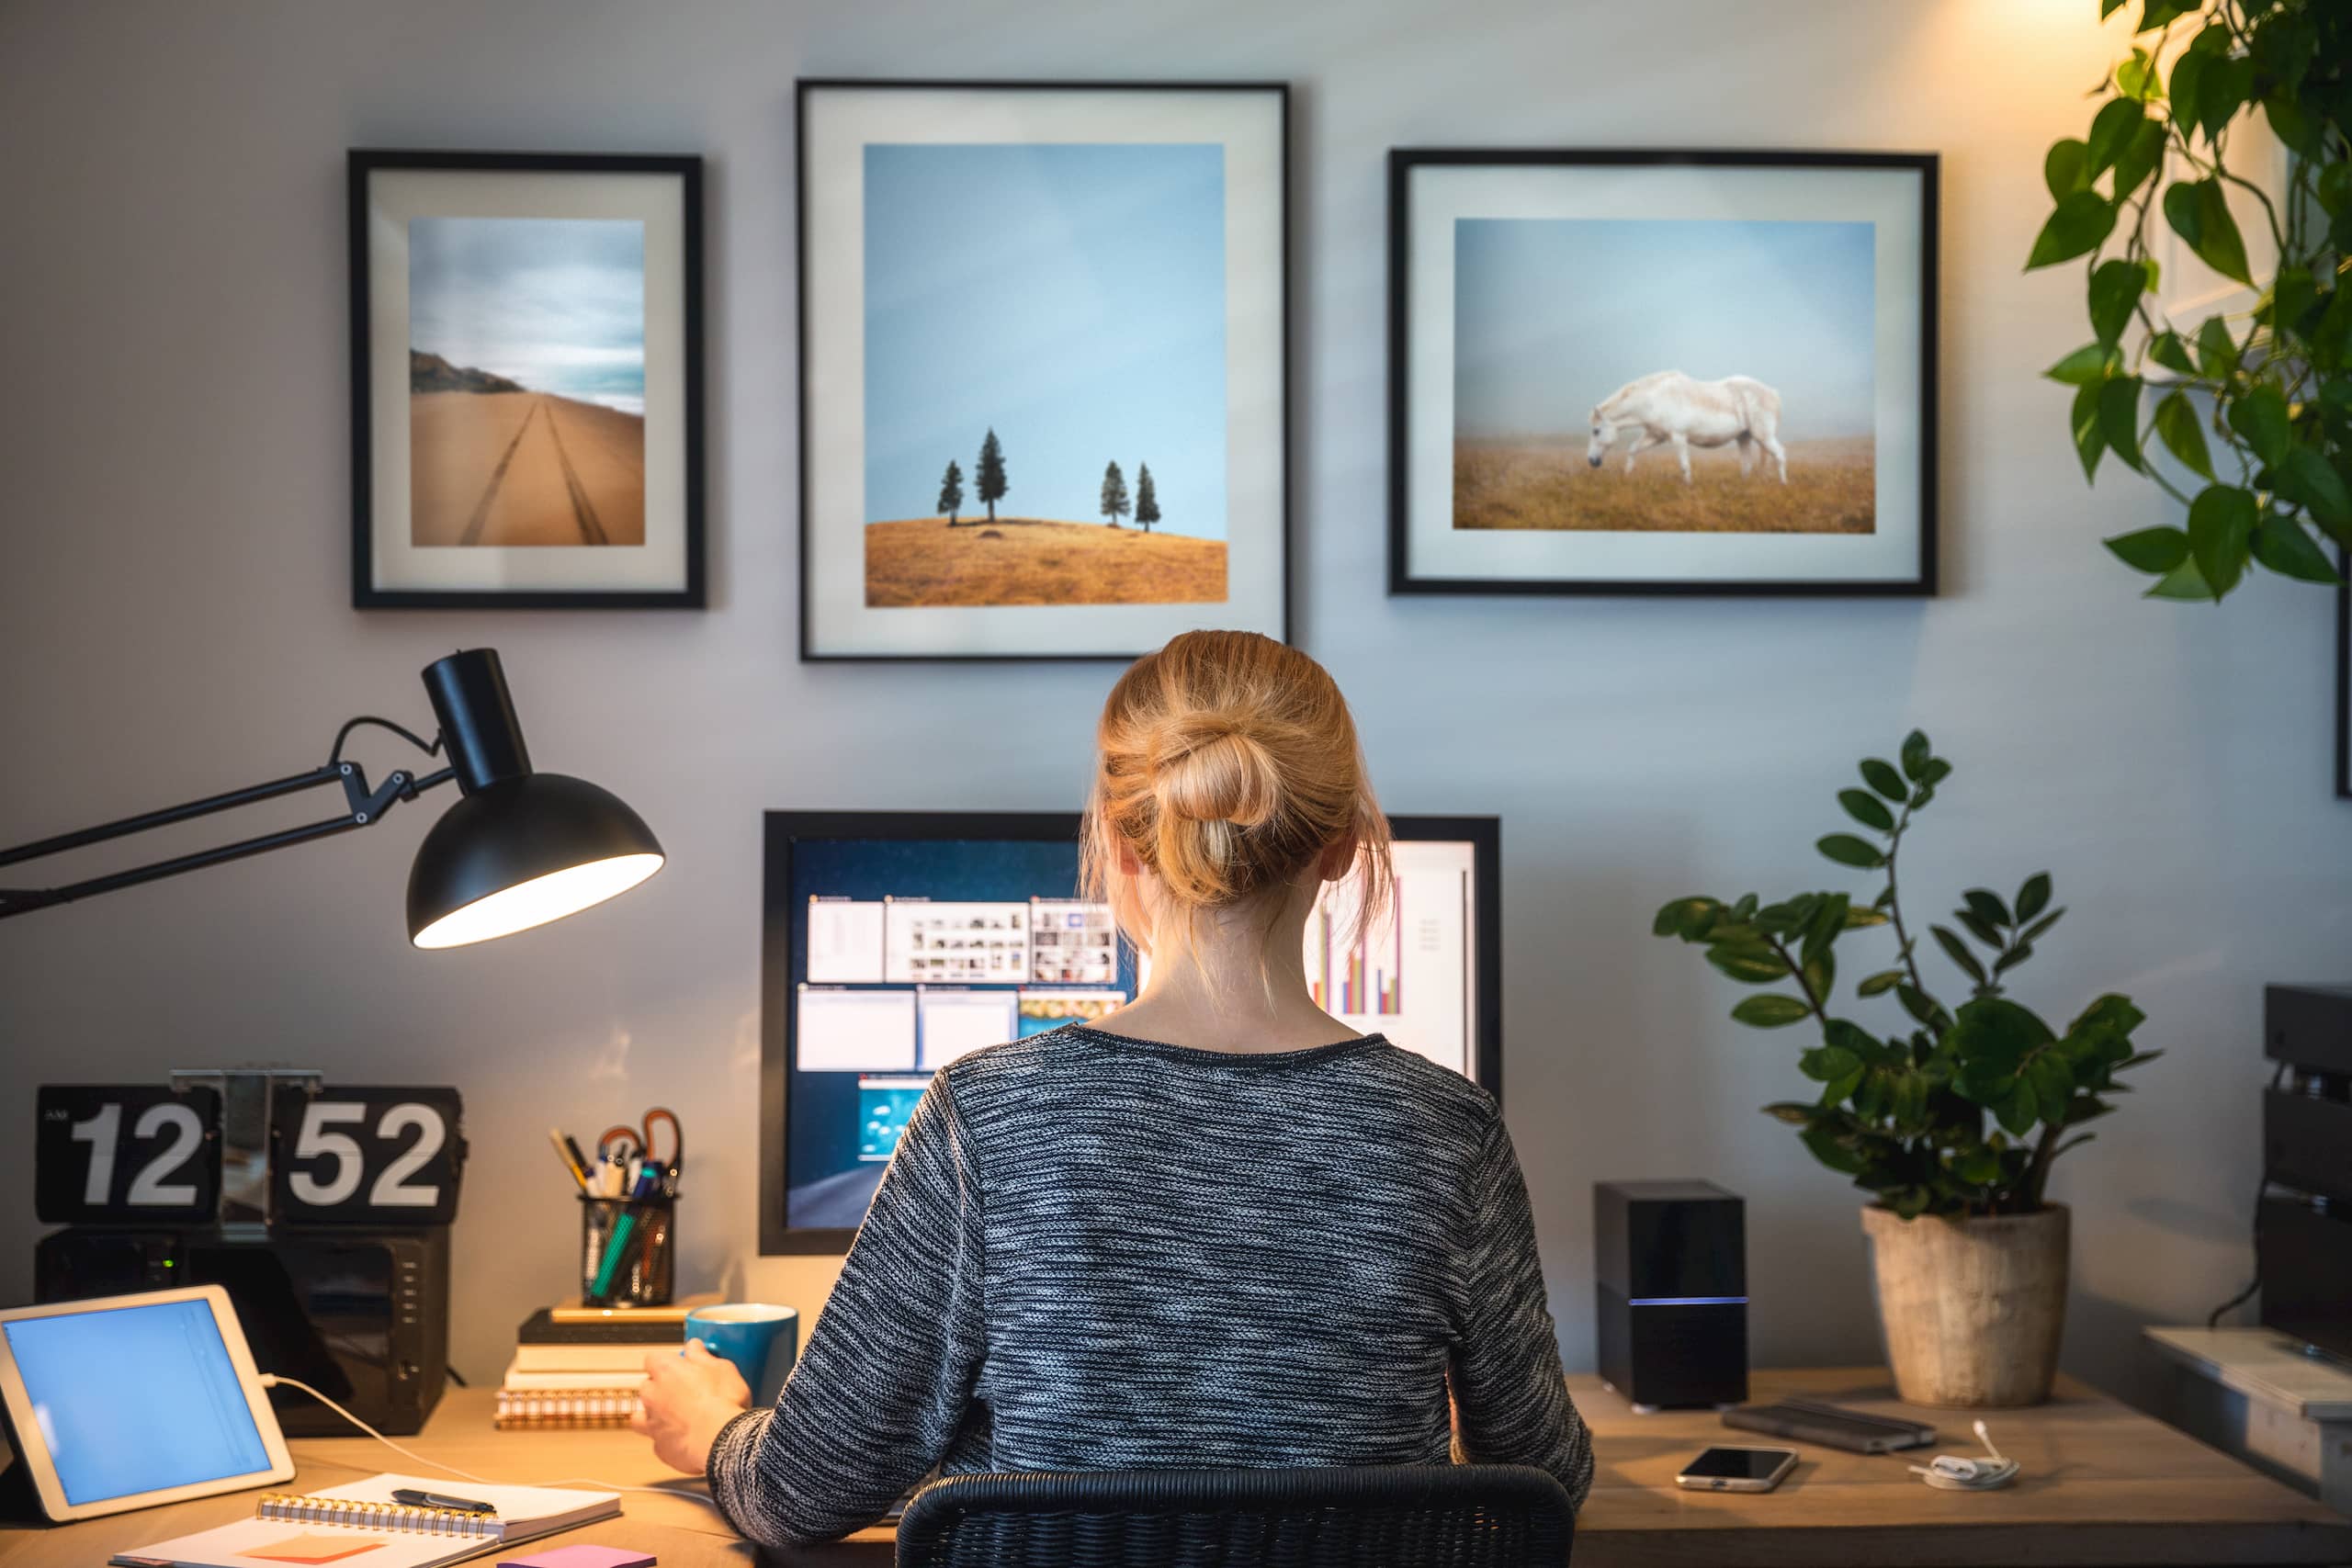 remote work best practices: ways to prepare your team to work anywhere - work from home experts